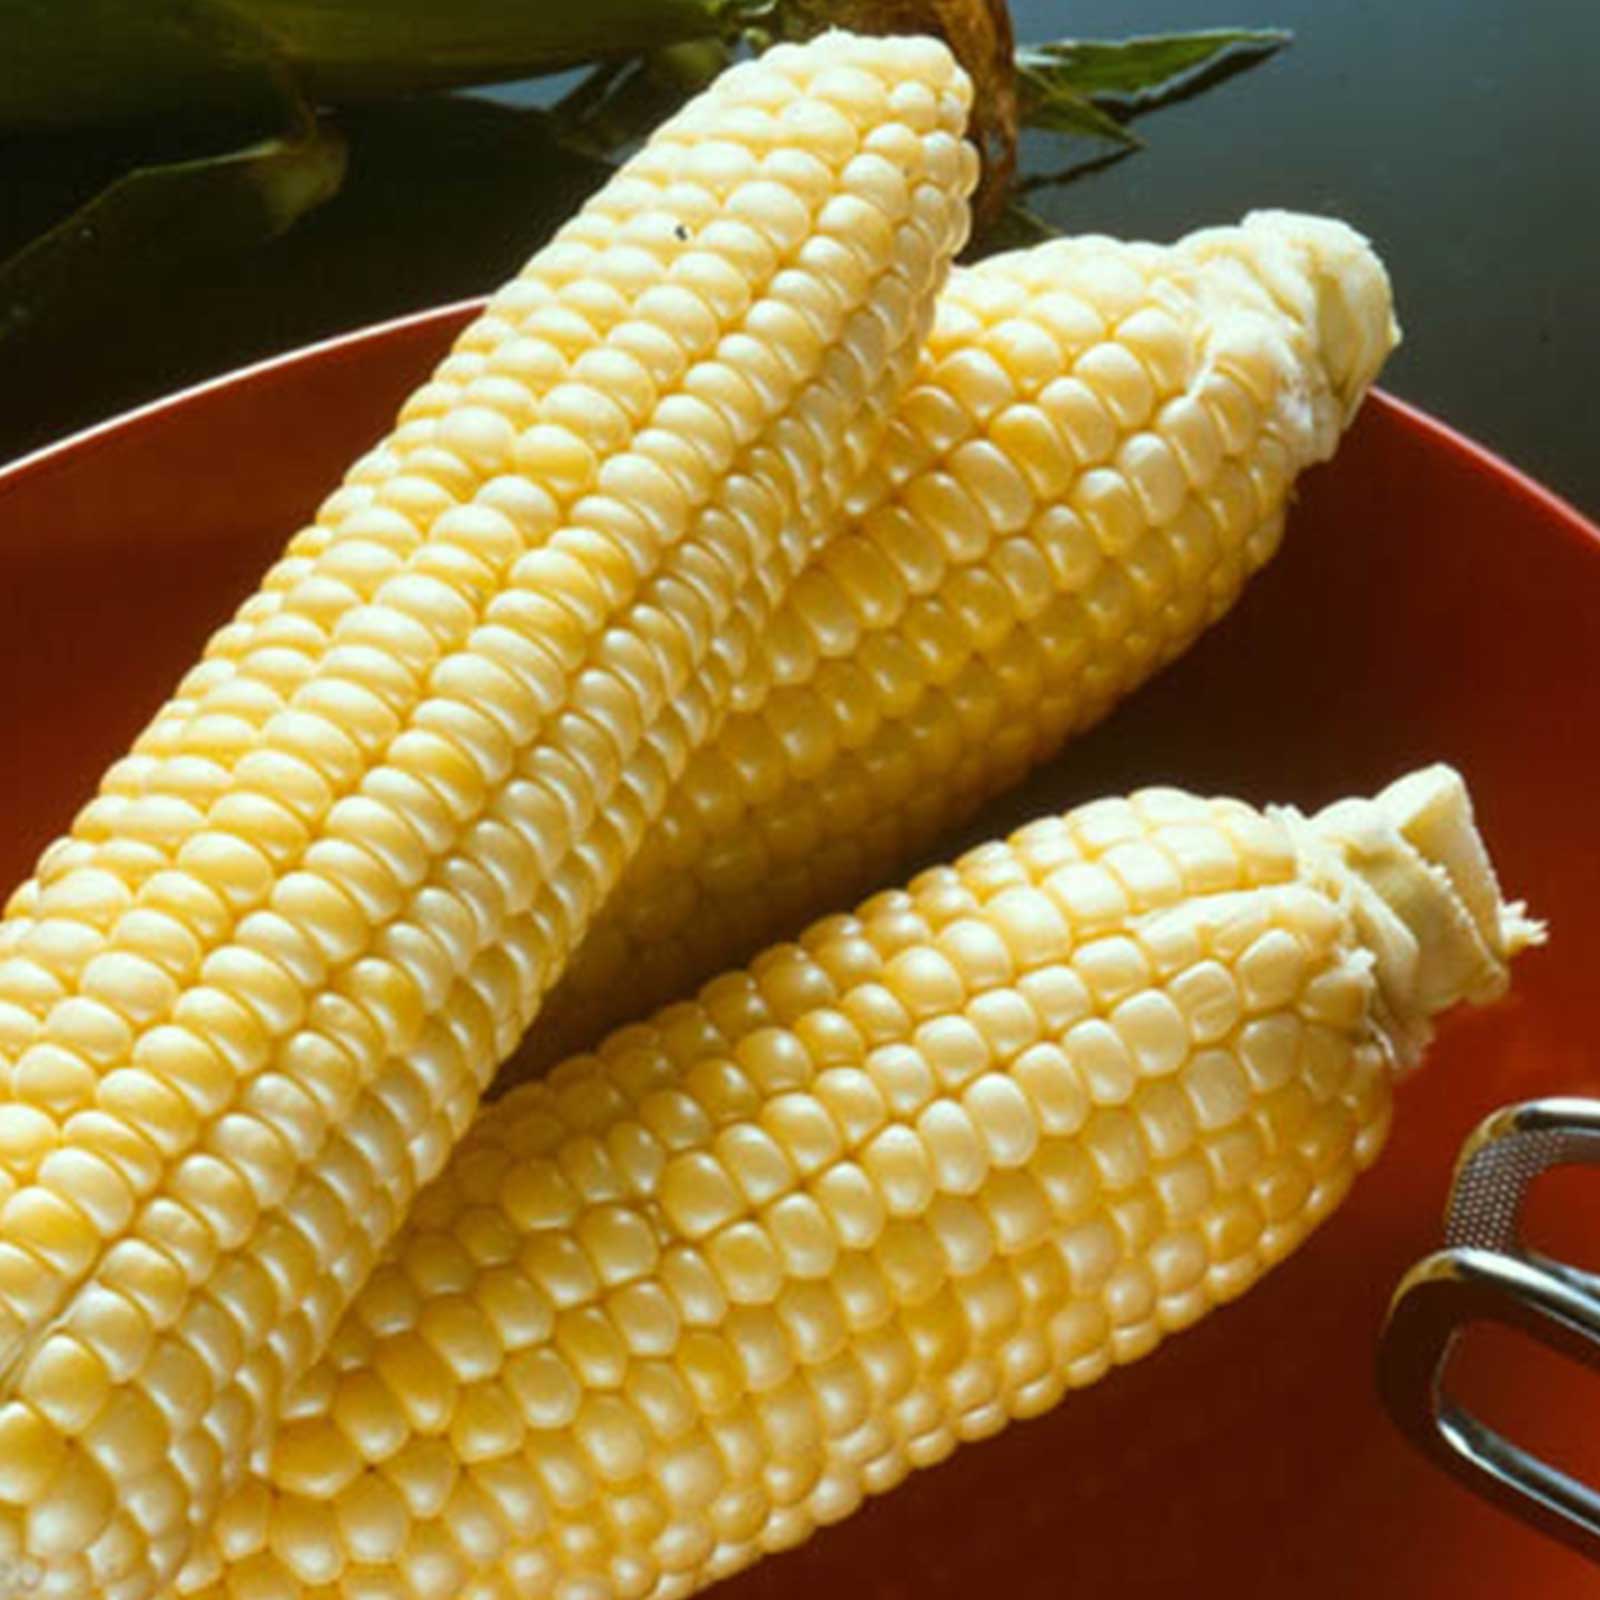 100 pcs Sweet Corn Non-GMO Seeds Vegetable Seeds Garden Home Plant Seed